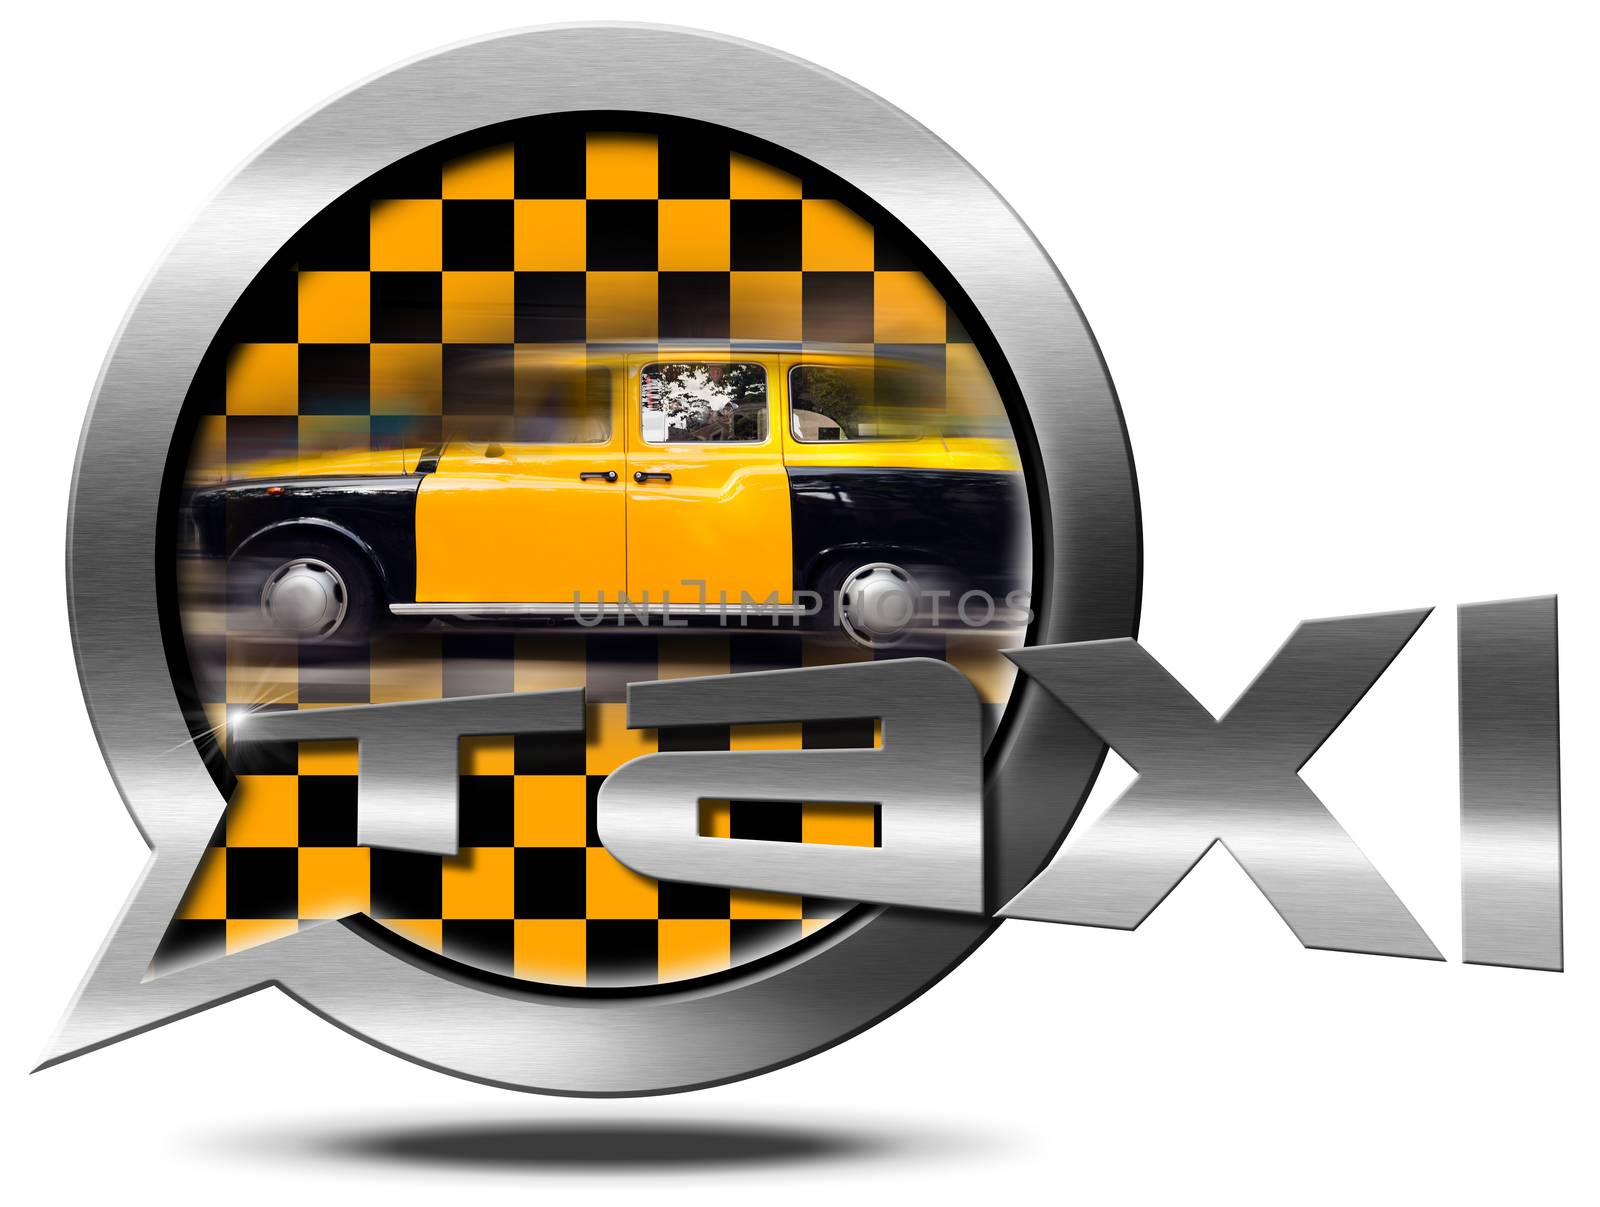 Taxi Service - Metallic Speech Bubble by catalby